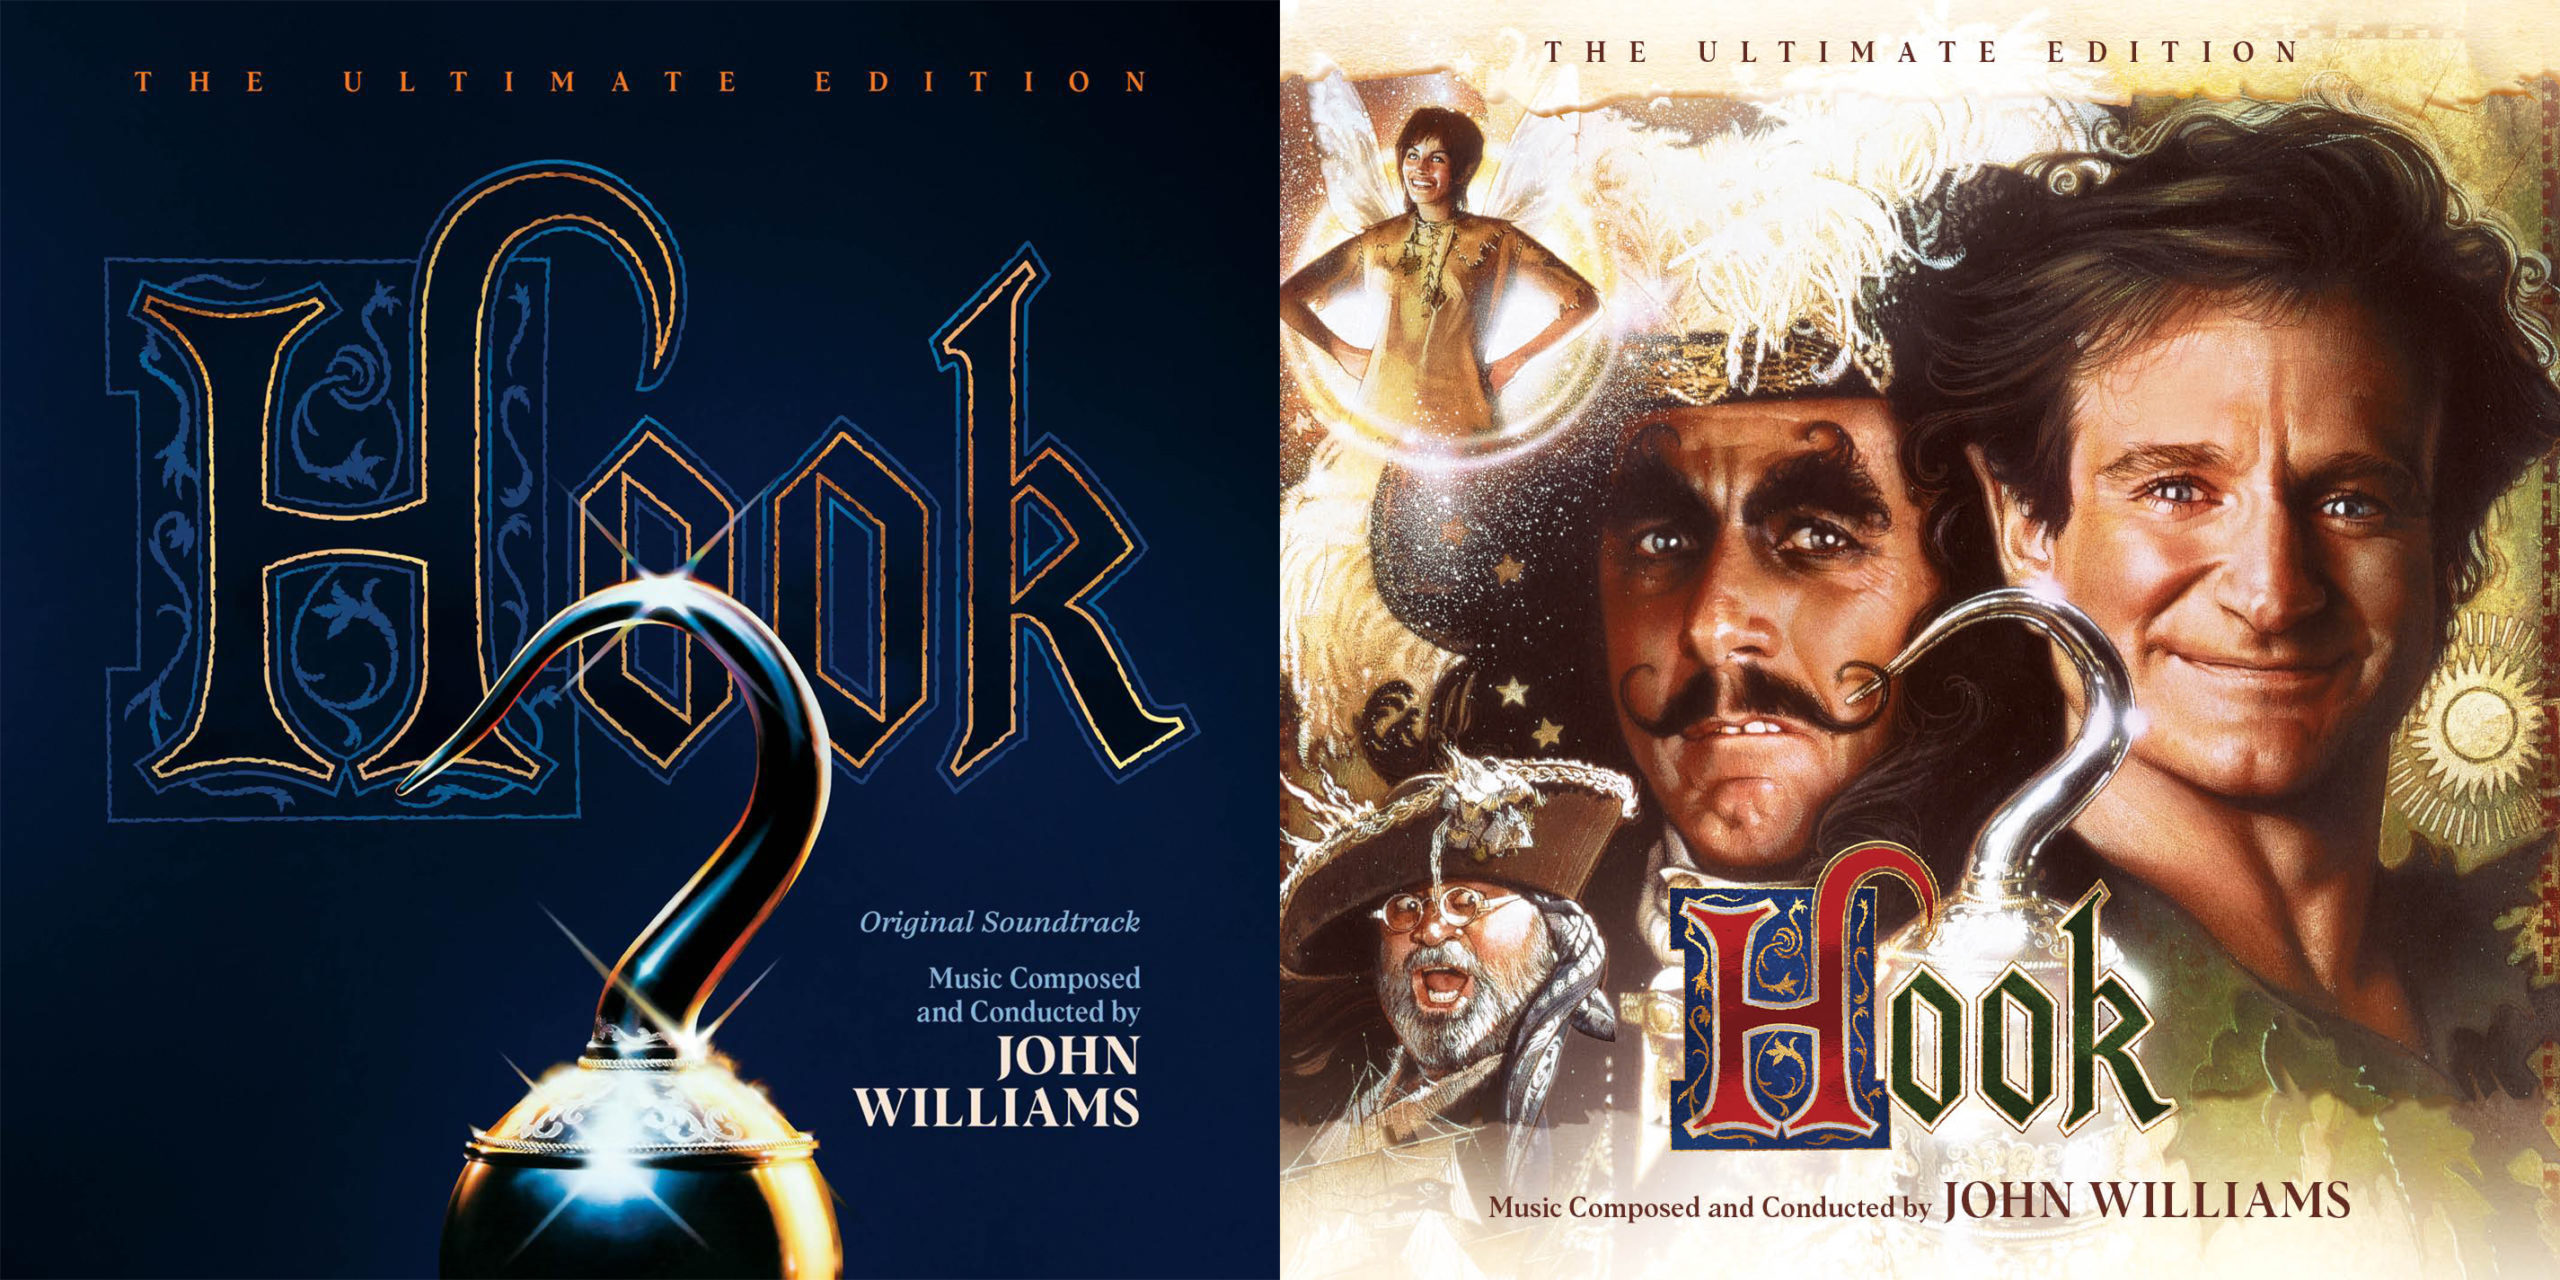 HOOK  Sony Pictures Entertainment